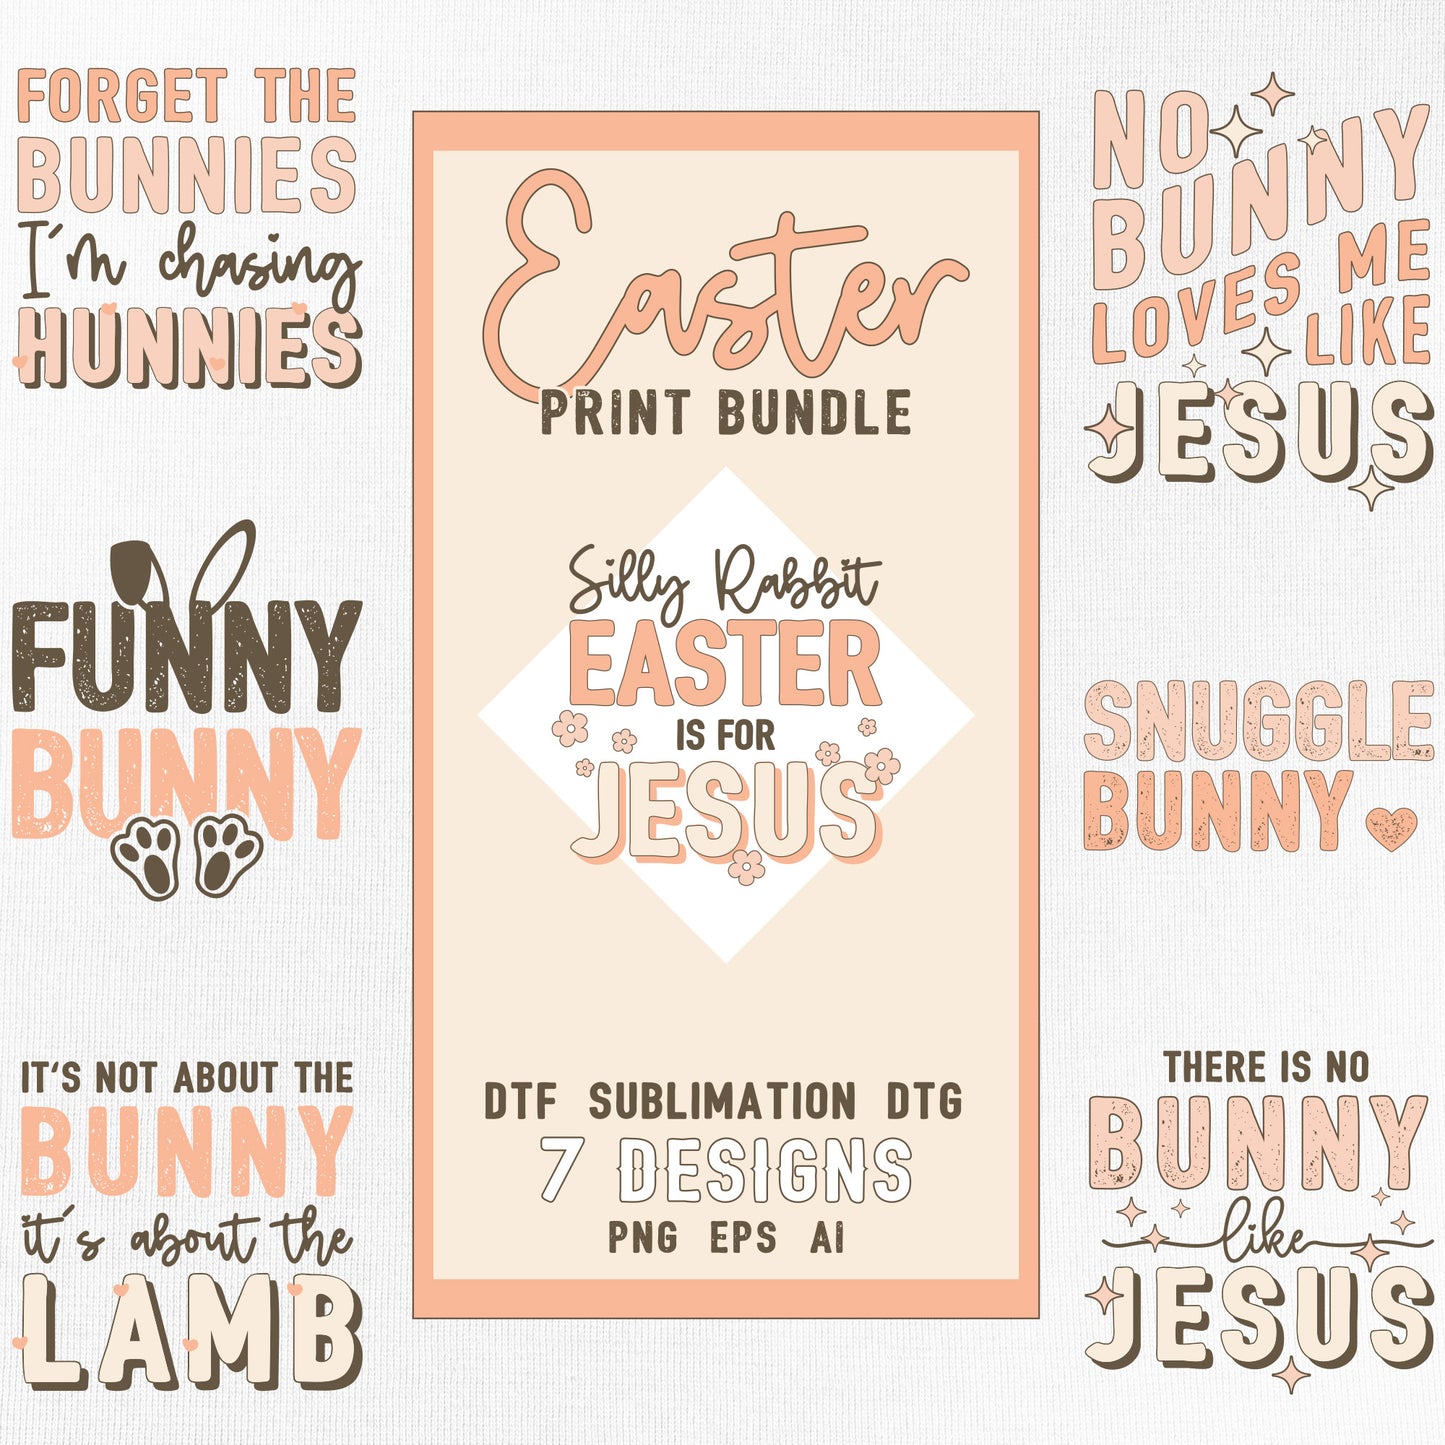 Easter Print Bundle cover, showing all 7 designs